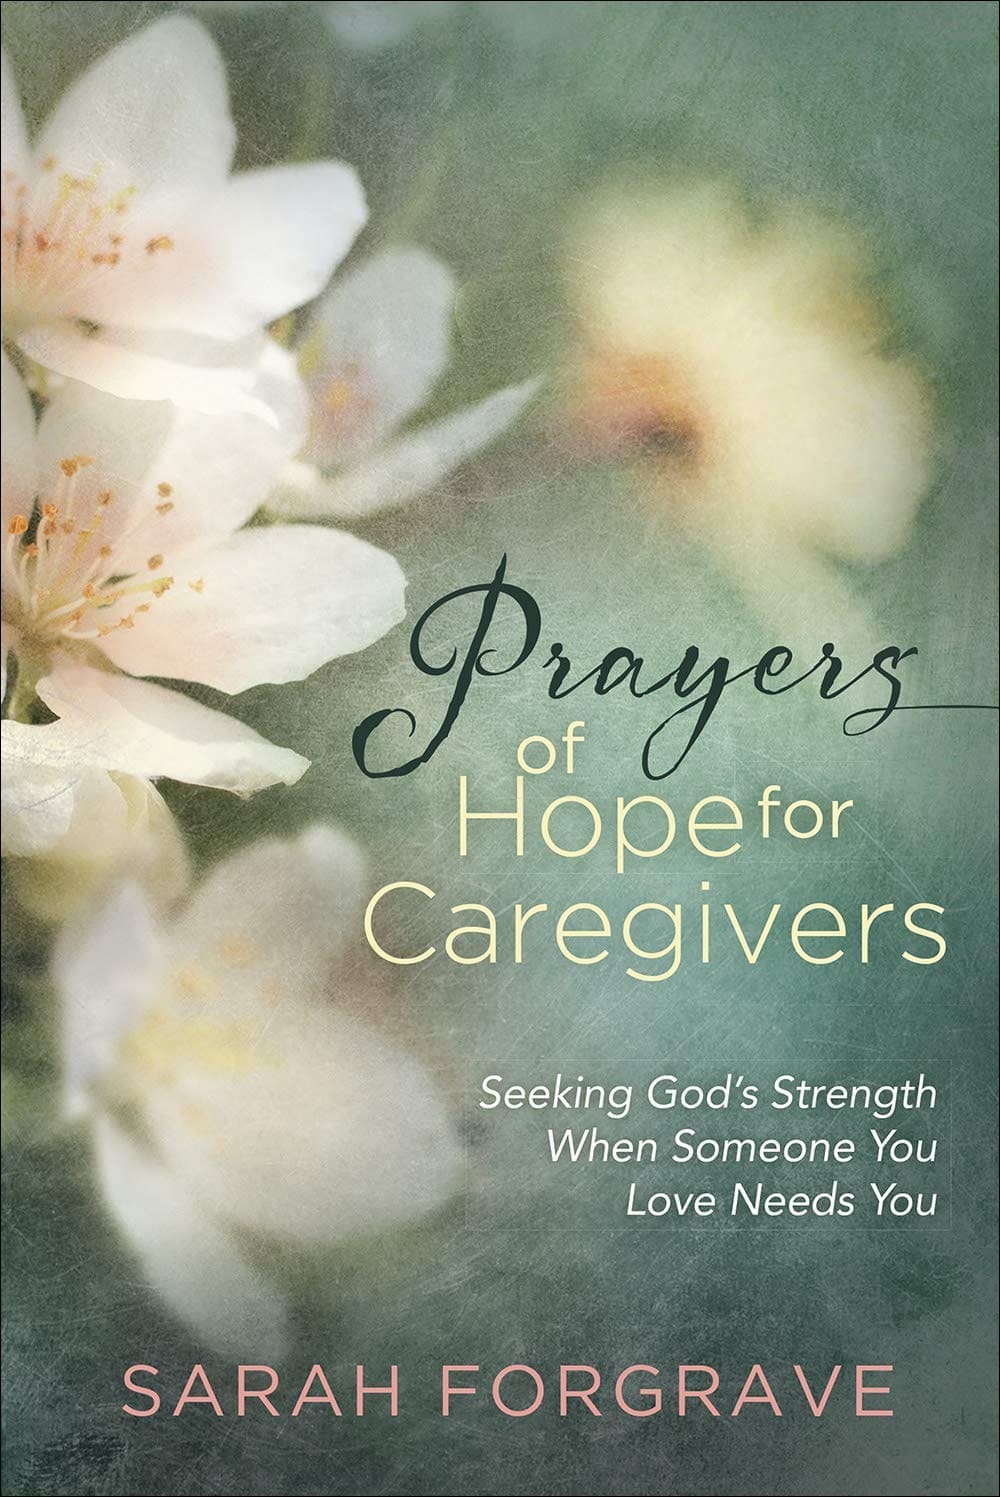 Prayers of Hope for Caregivers: Seeking God’s Strength When Someone You Love Needs You